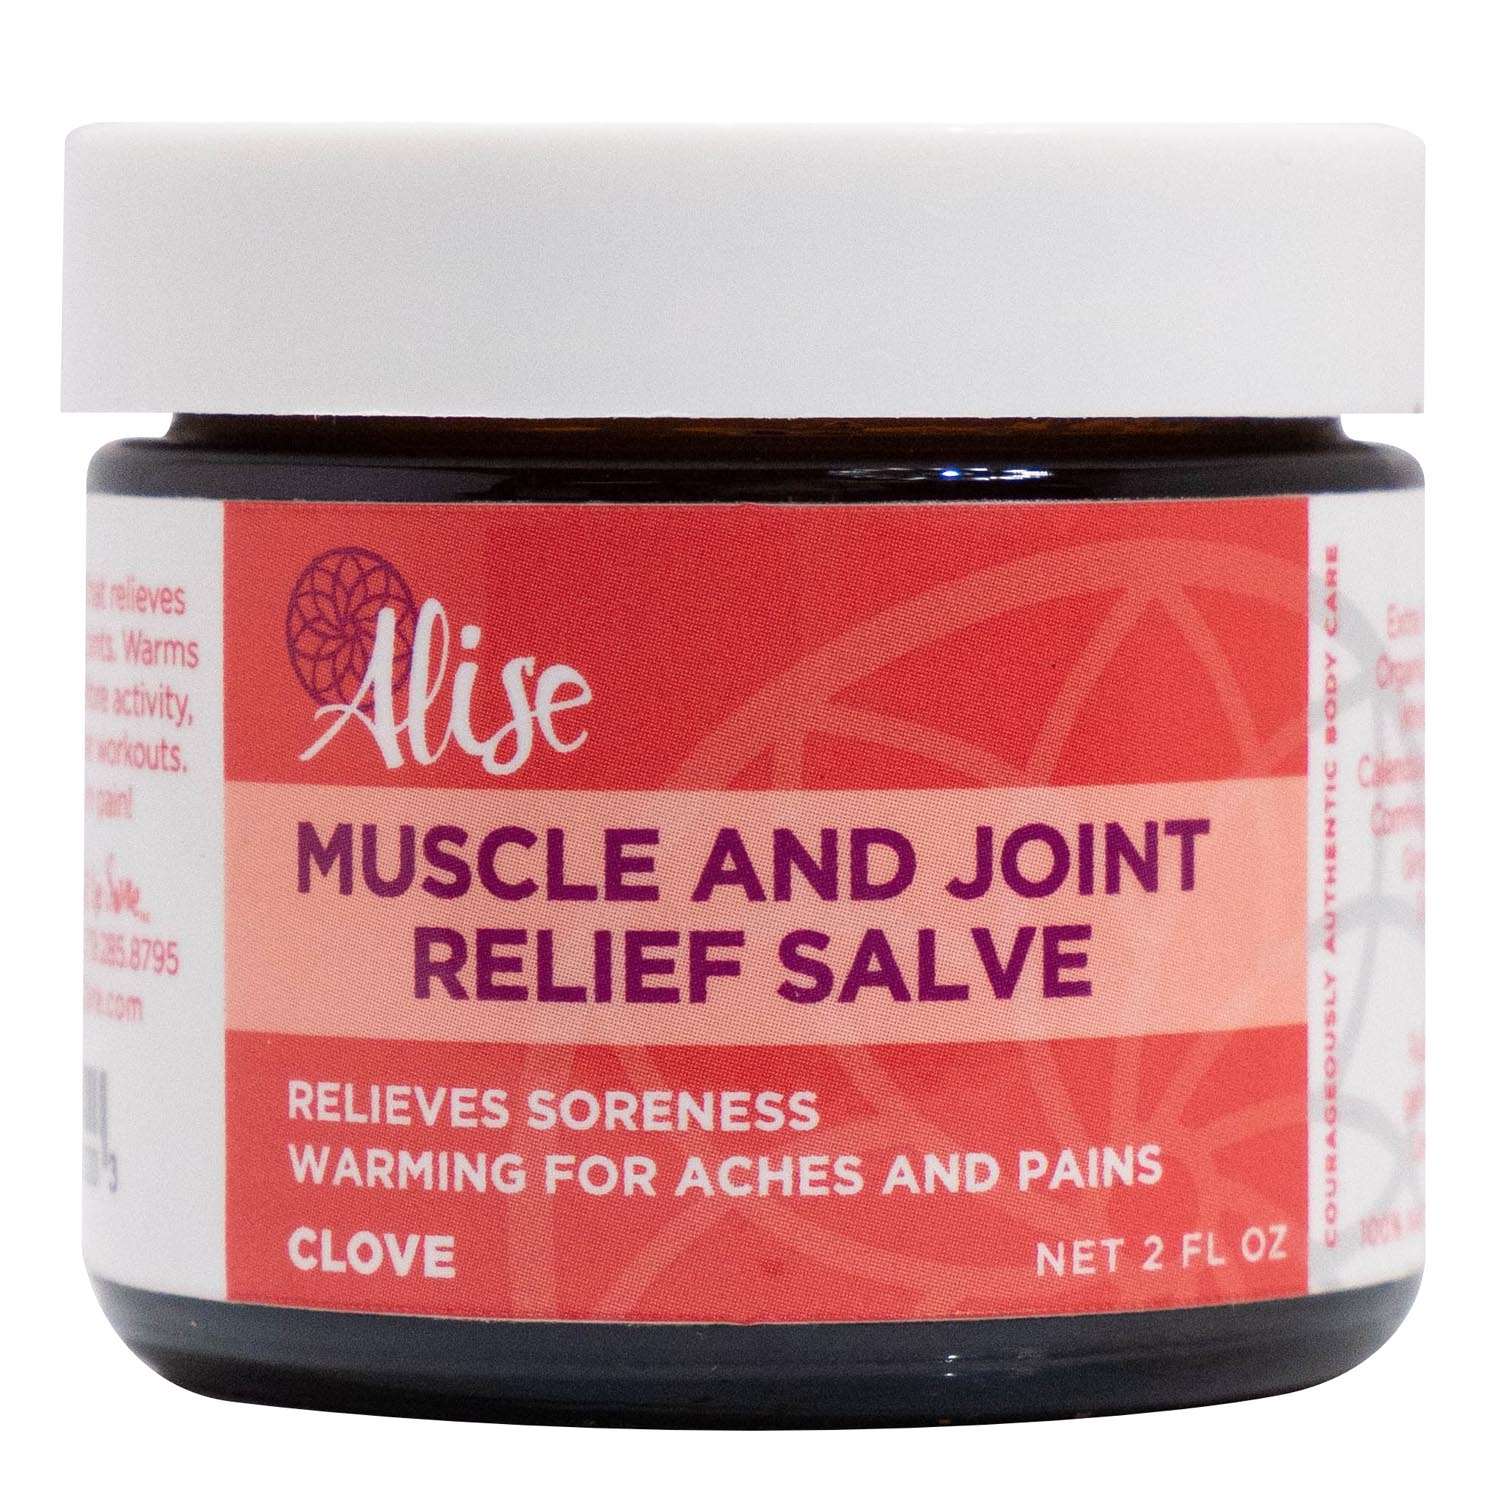 Muscle and Joint Relief Salve Warming Clove 2oz Jar handcrafted by Alise Body Care